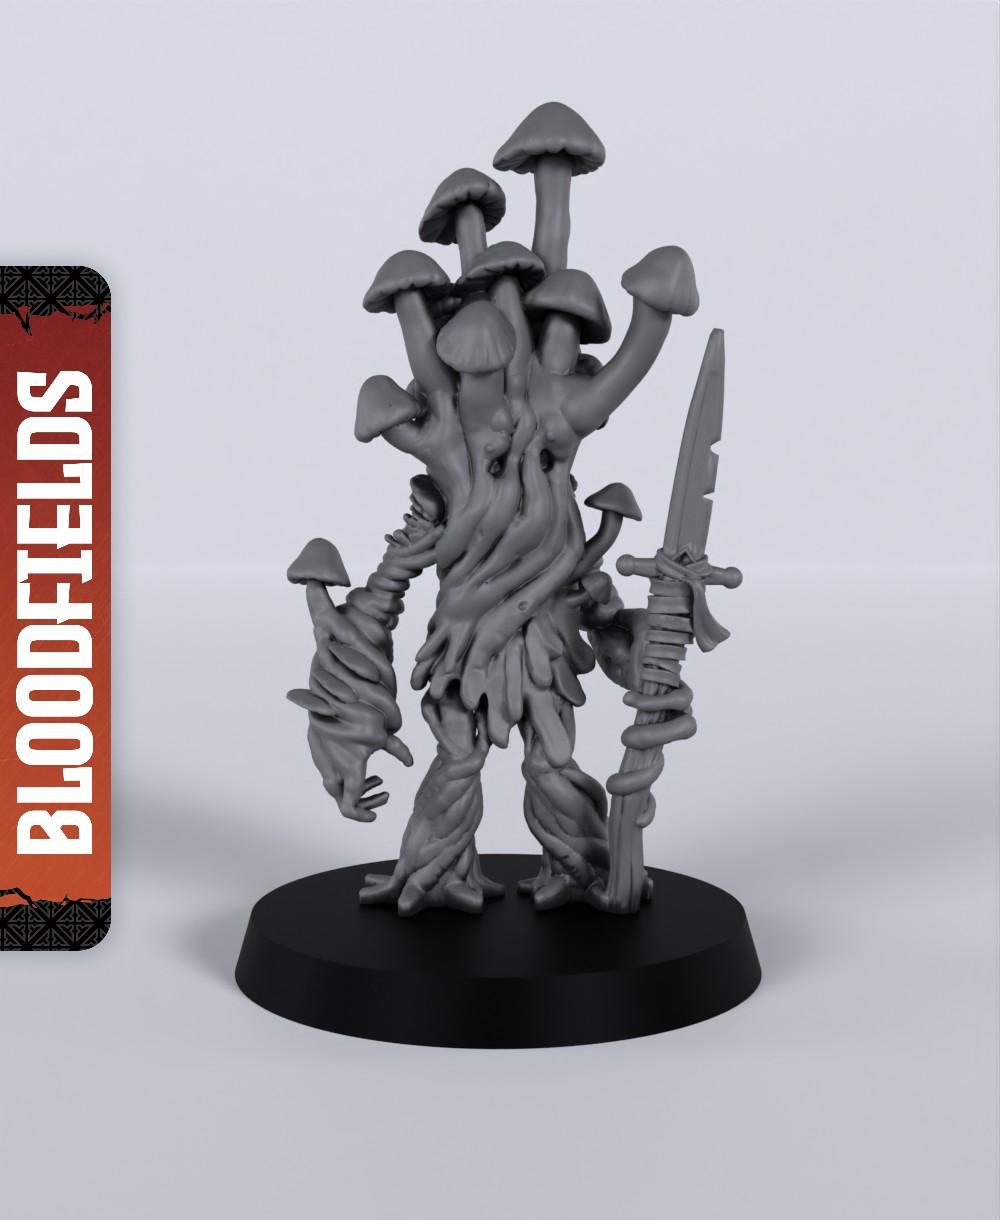 Shroom Elder - With Free Dragon Warhammer - 5e DnD Inspired for RPG and Wargamers 3d model